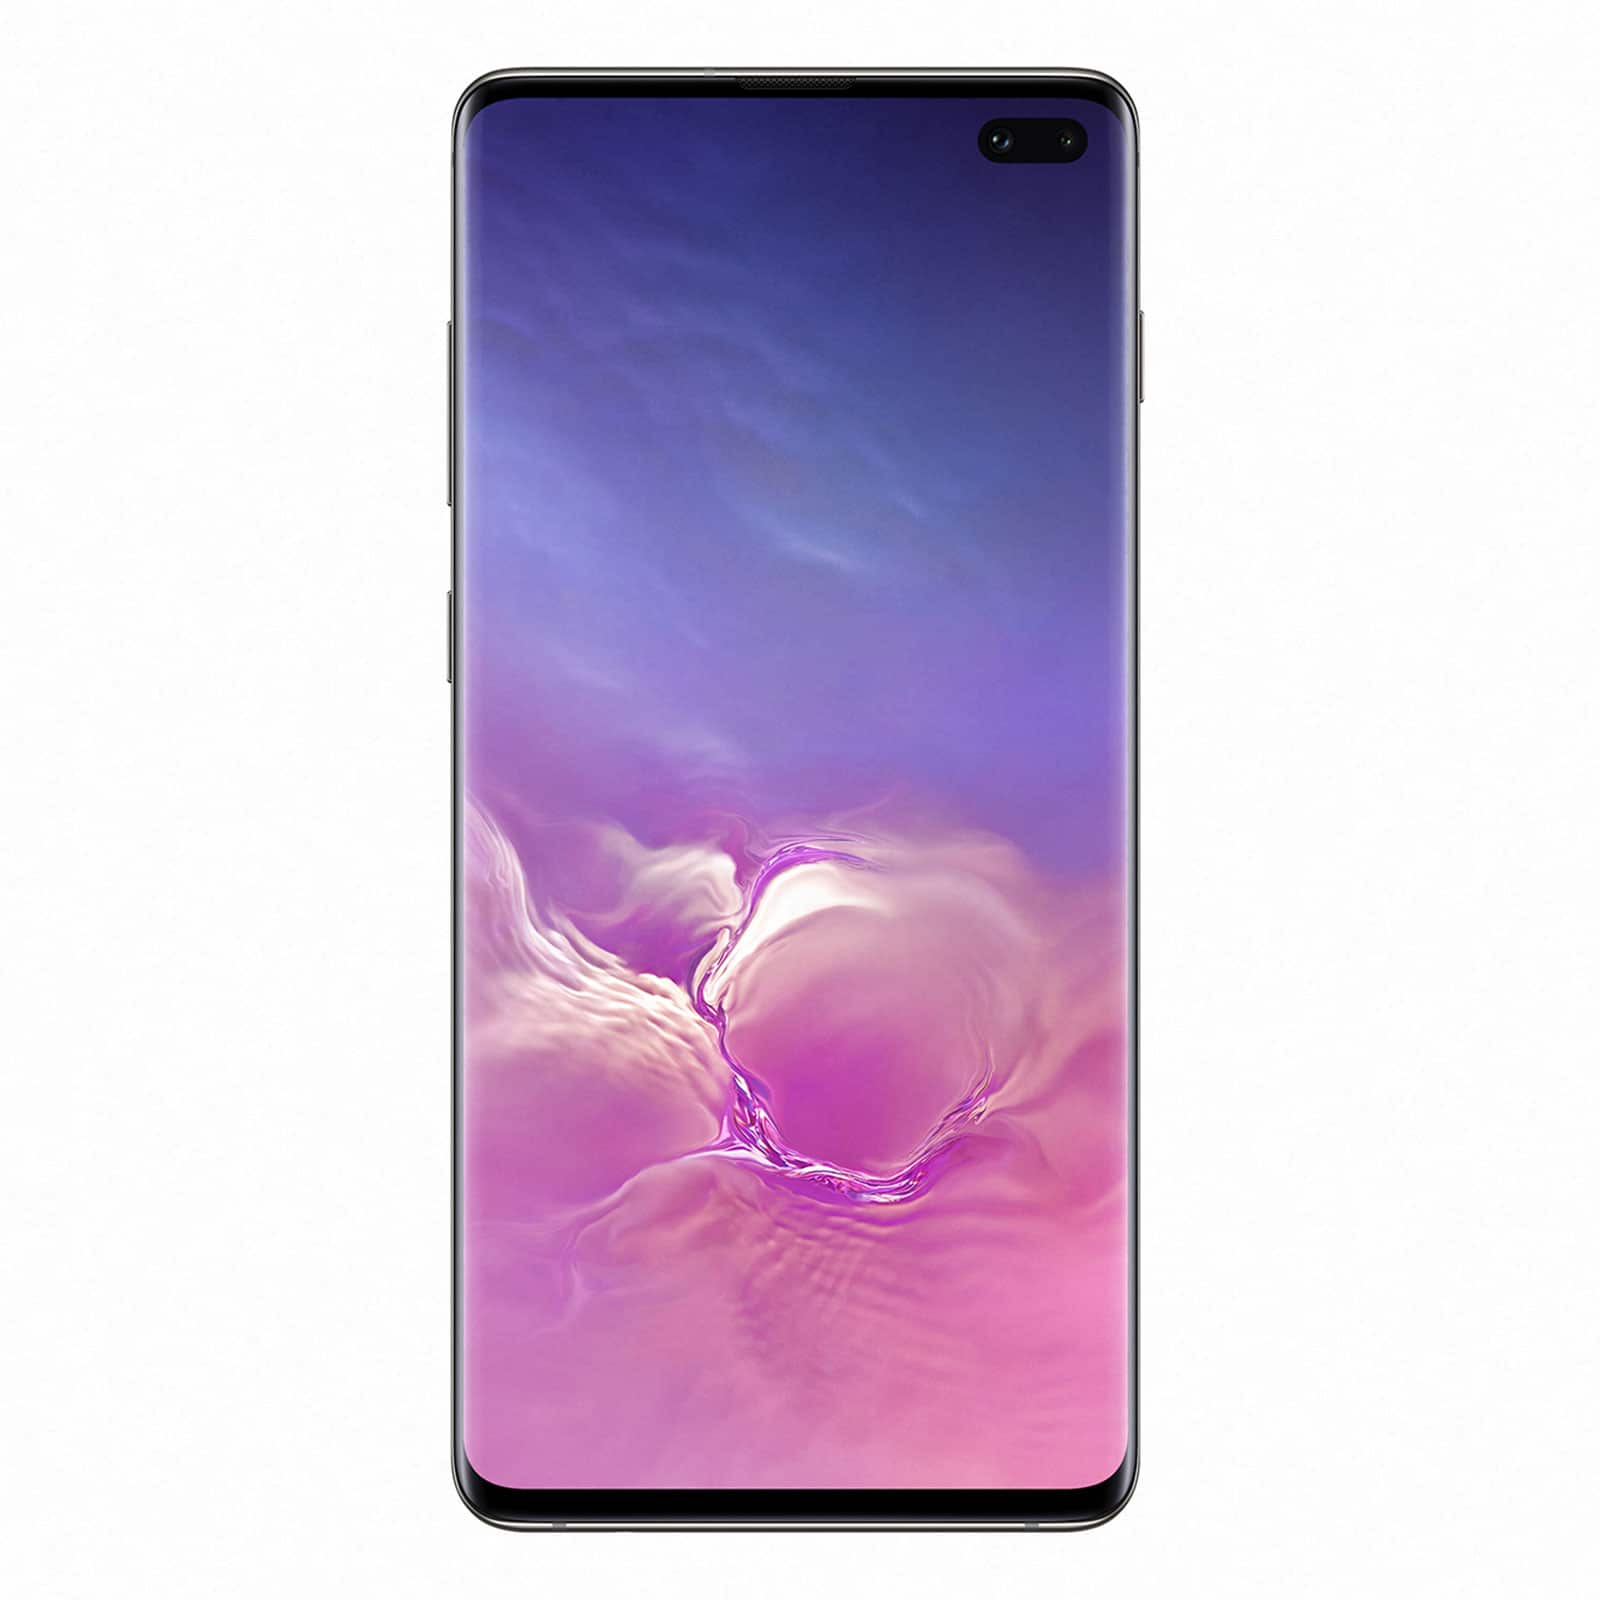 Samsung Galaxy S10+ specs and reviews â€